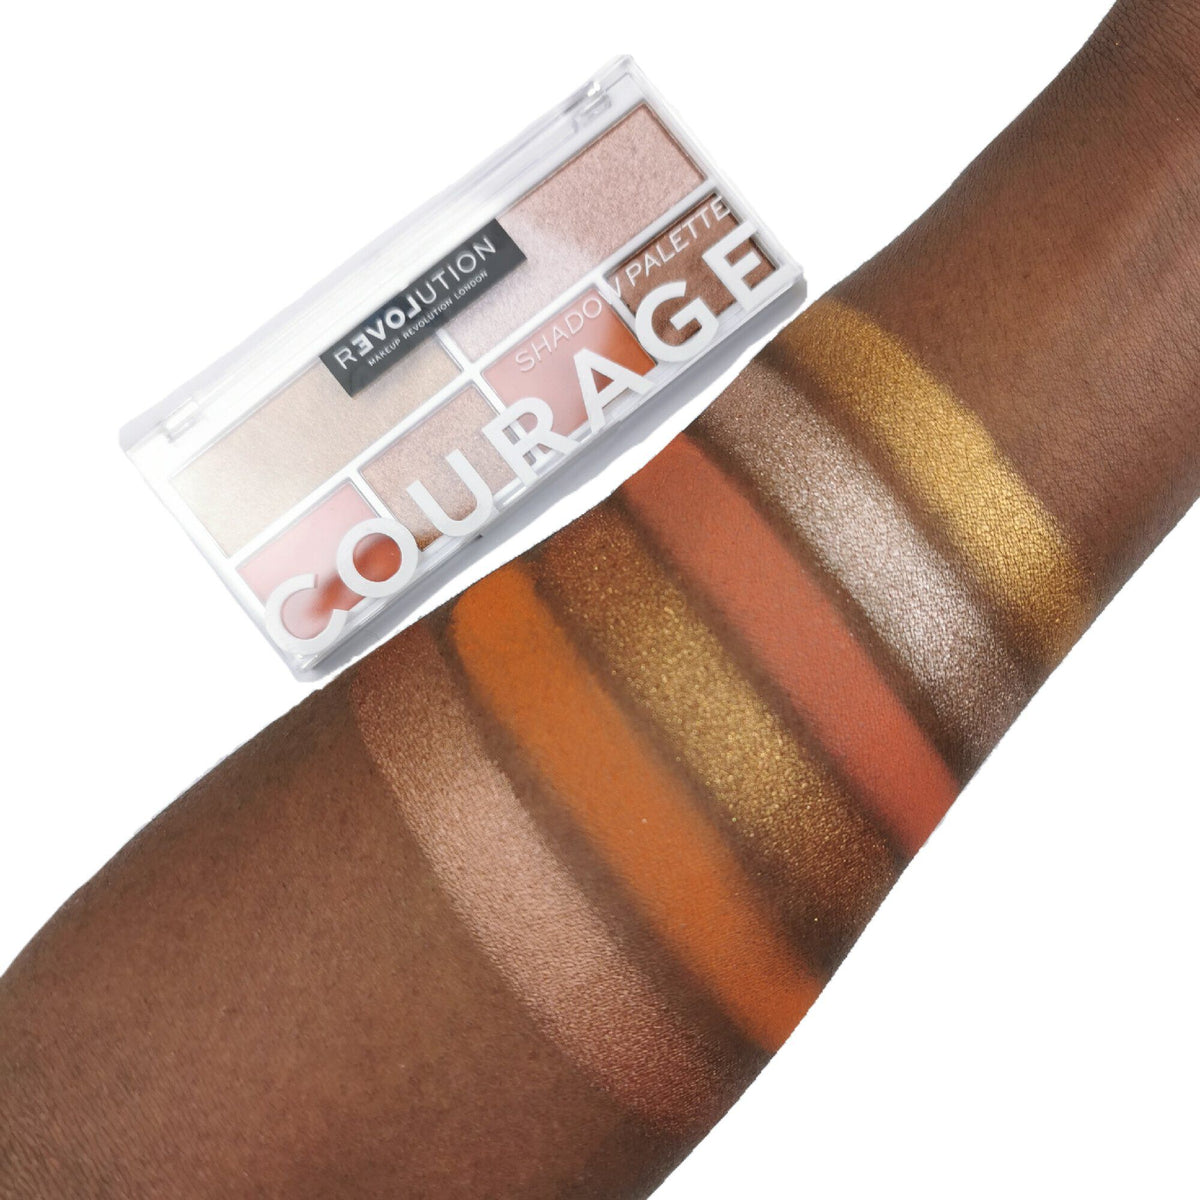 Relove By Revolution Colour Play Courage Eyeshadow Palette